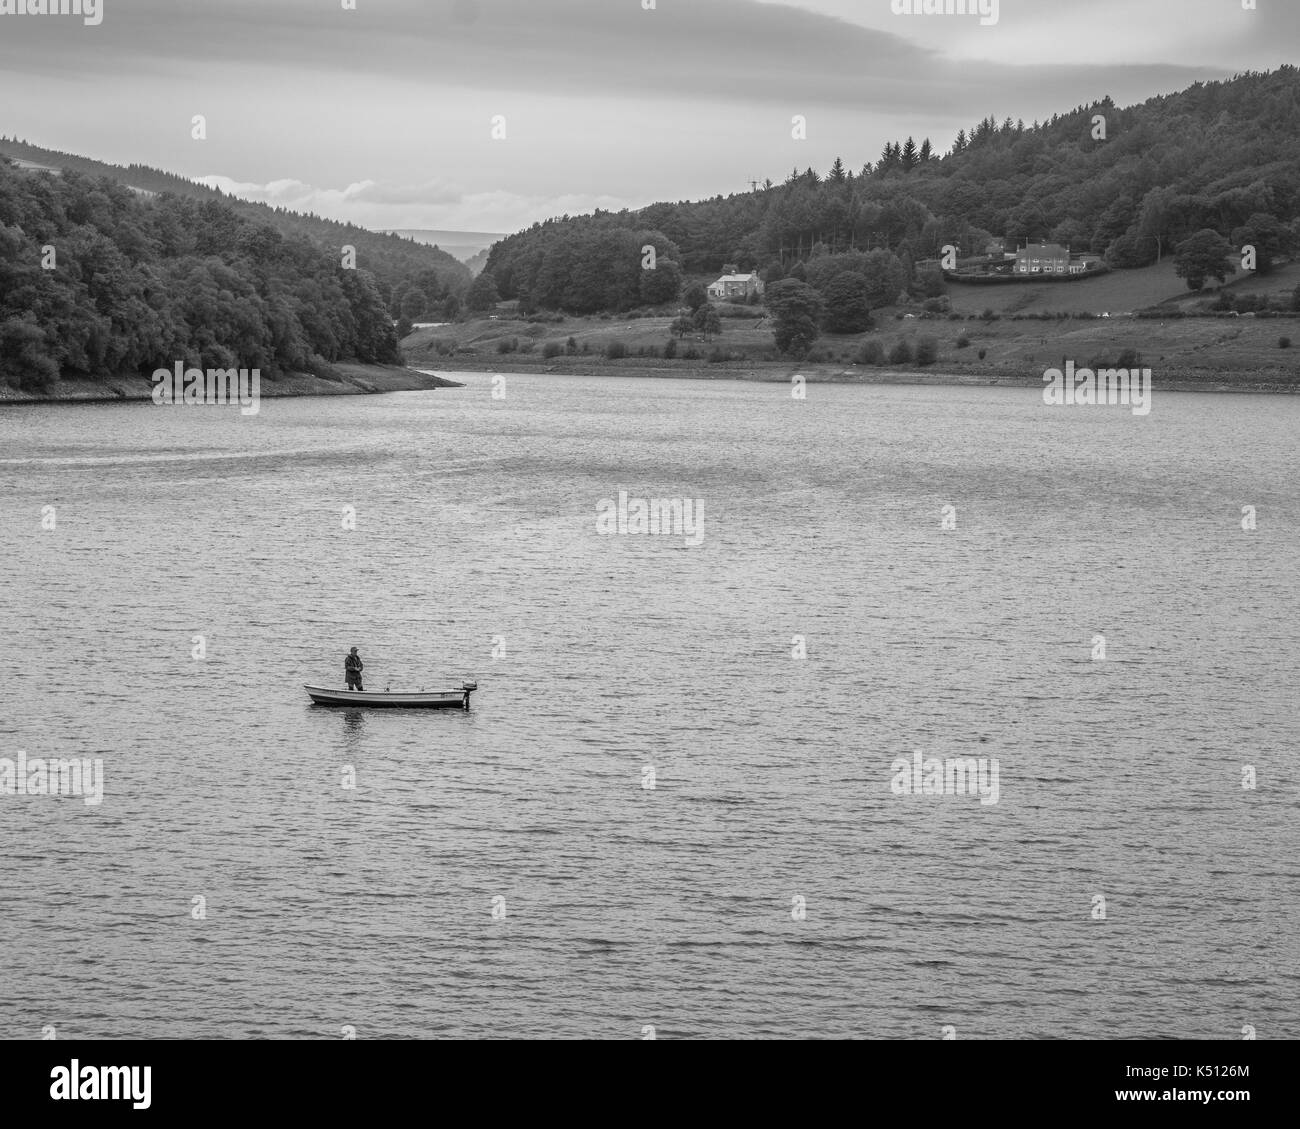 Lone fly fisherman on Ladybower Reservoir. Fly fisherman in a small lake boat, fisherman standing in the boat casting out line. Stock Photo